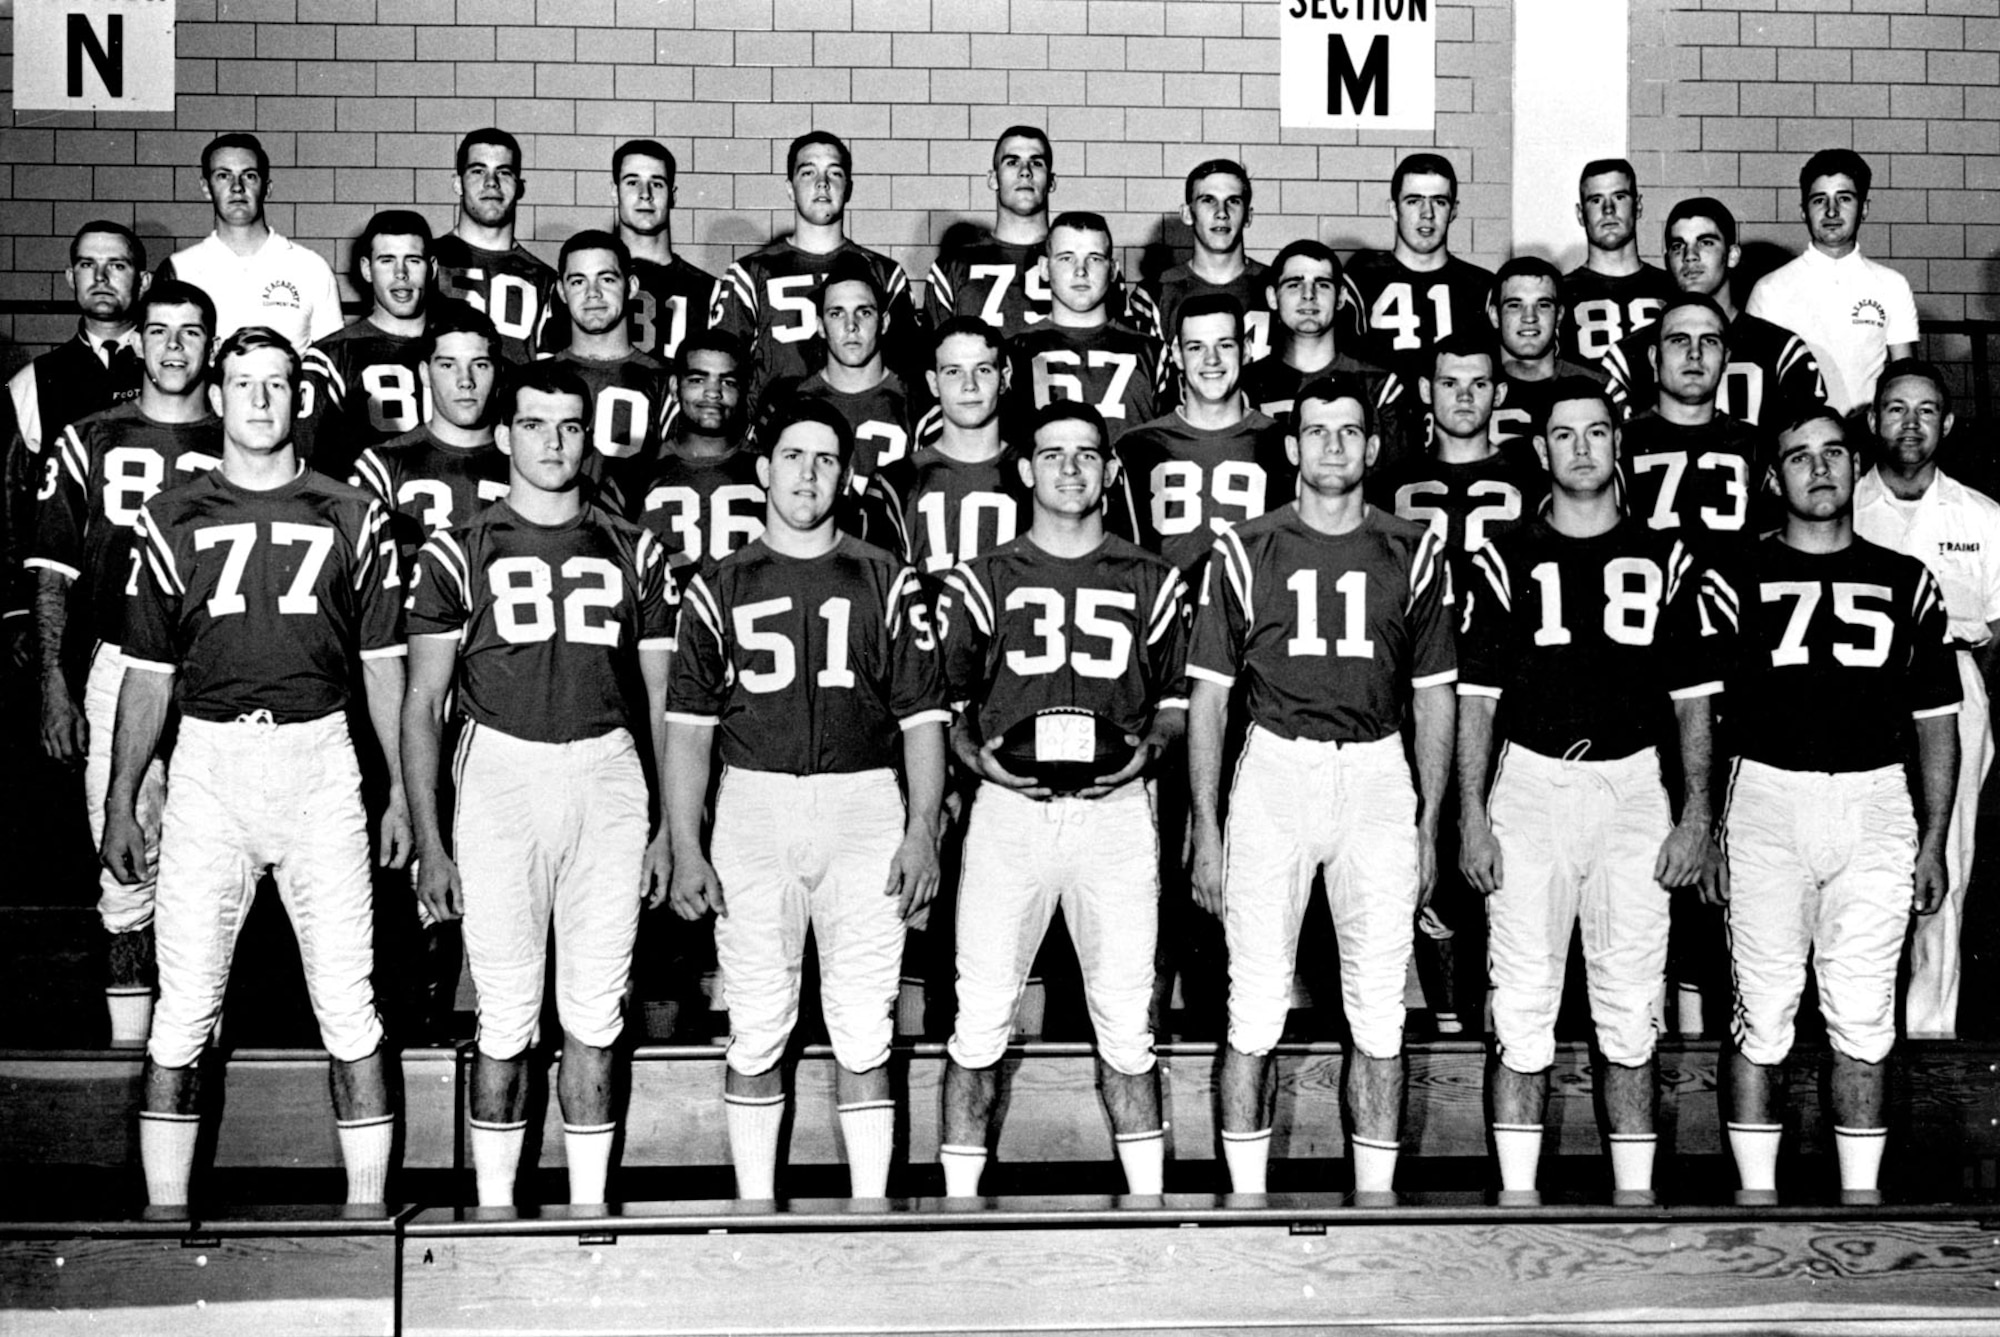 The 1963 Air Force Academy junior varsity football team. Cadet Lance Sijan is number 82 in the front row. (U.S. Air Force photo)